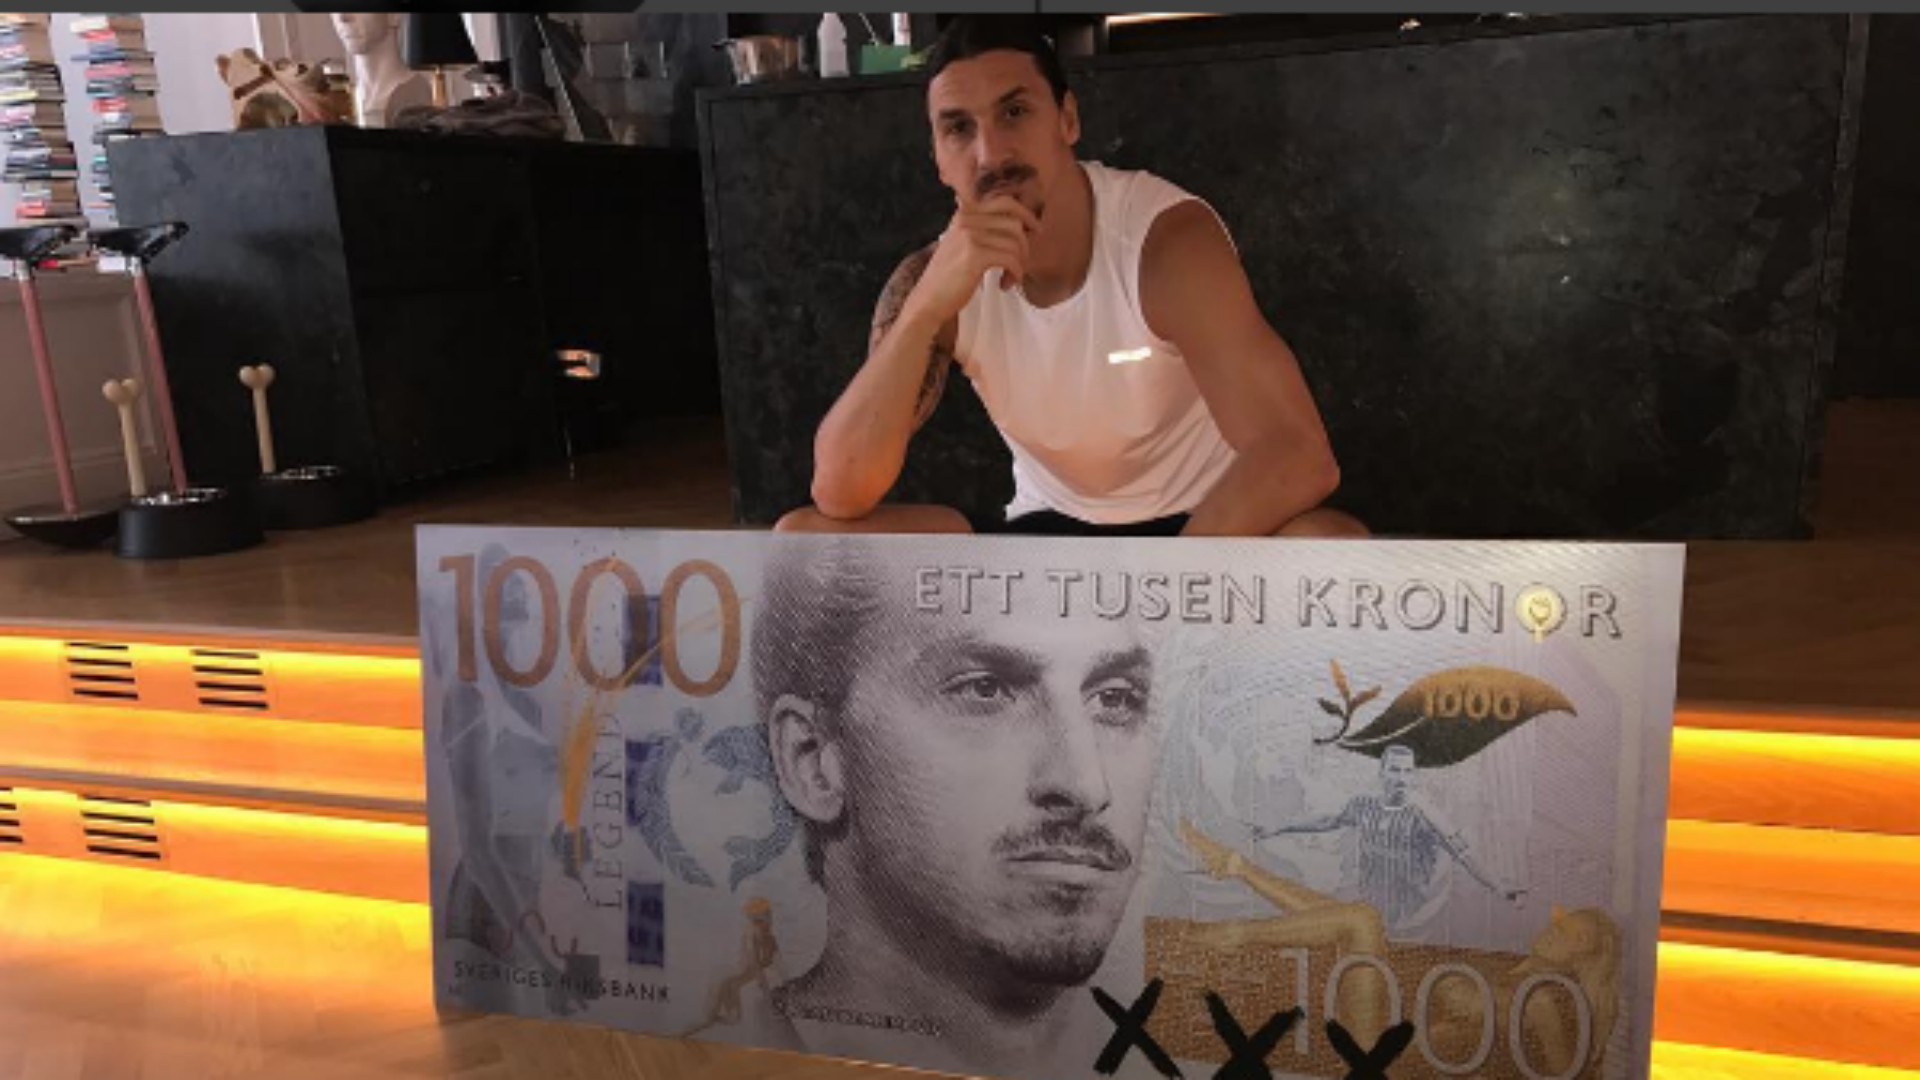 Sweden's best ever goalscorer, Zlatan Ibrahimovic, has been immortalized by a local Swedish artist on a 1,000 kroner note. It's not official currency, of course. But who can say what the future holds?